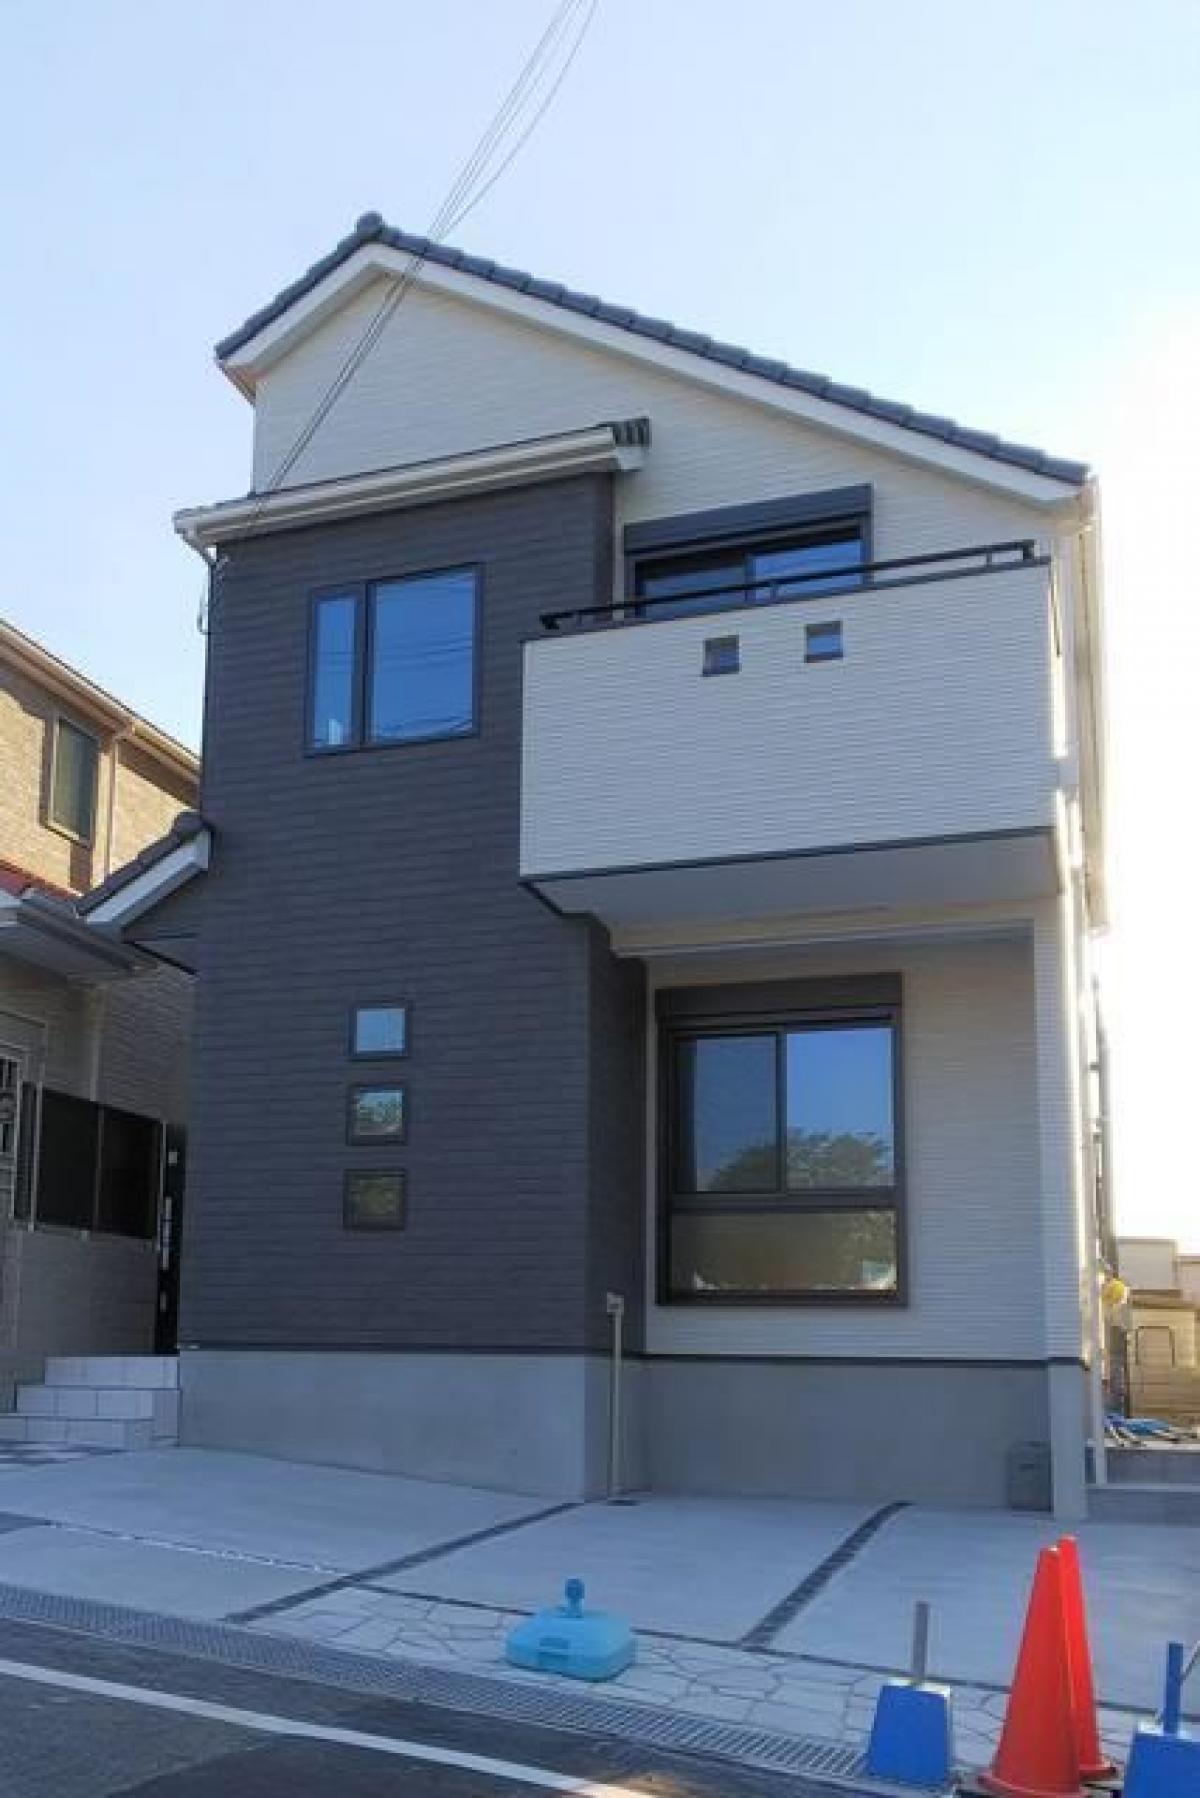 Picture of Home For Sale in Akashi Shi, Hyogo, Japan